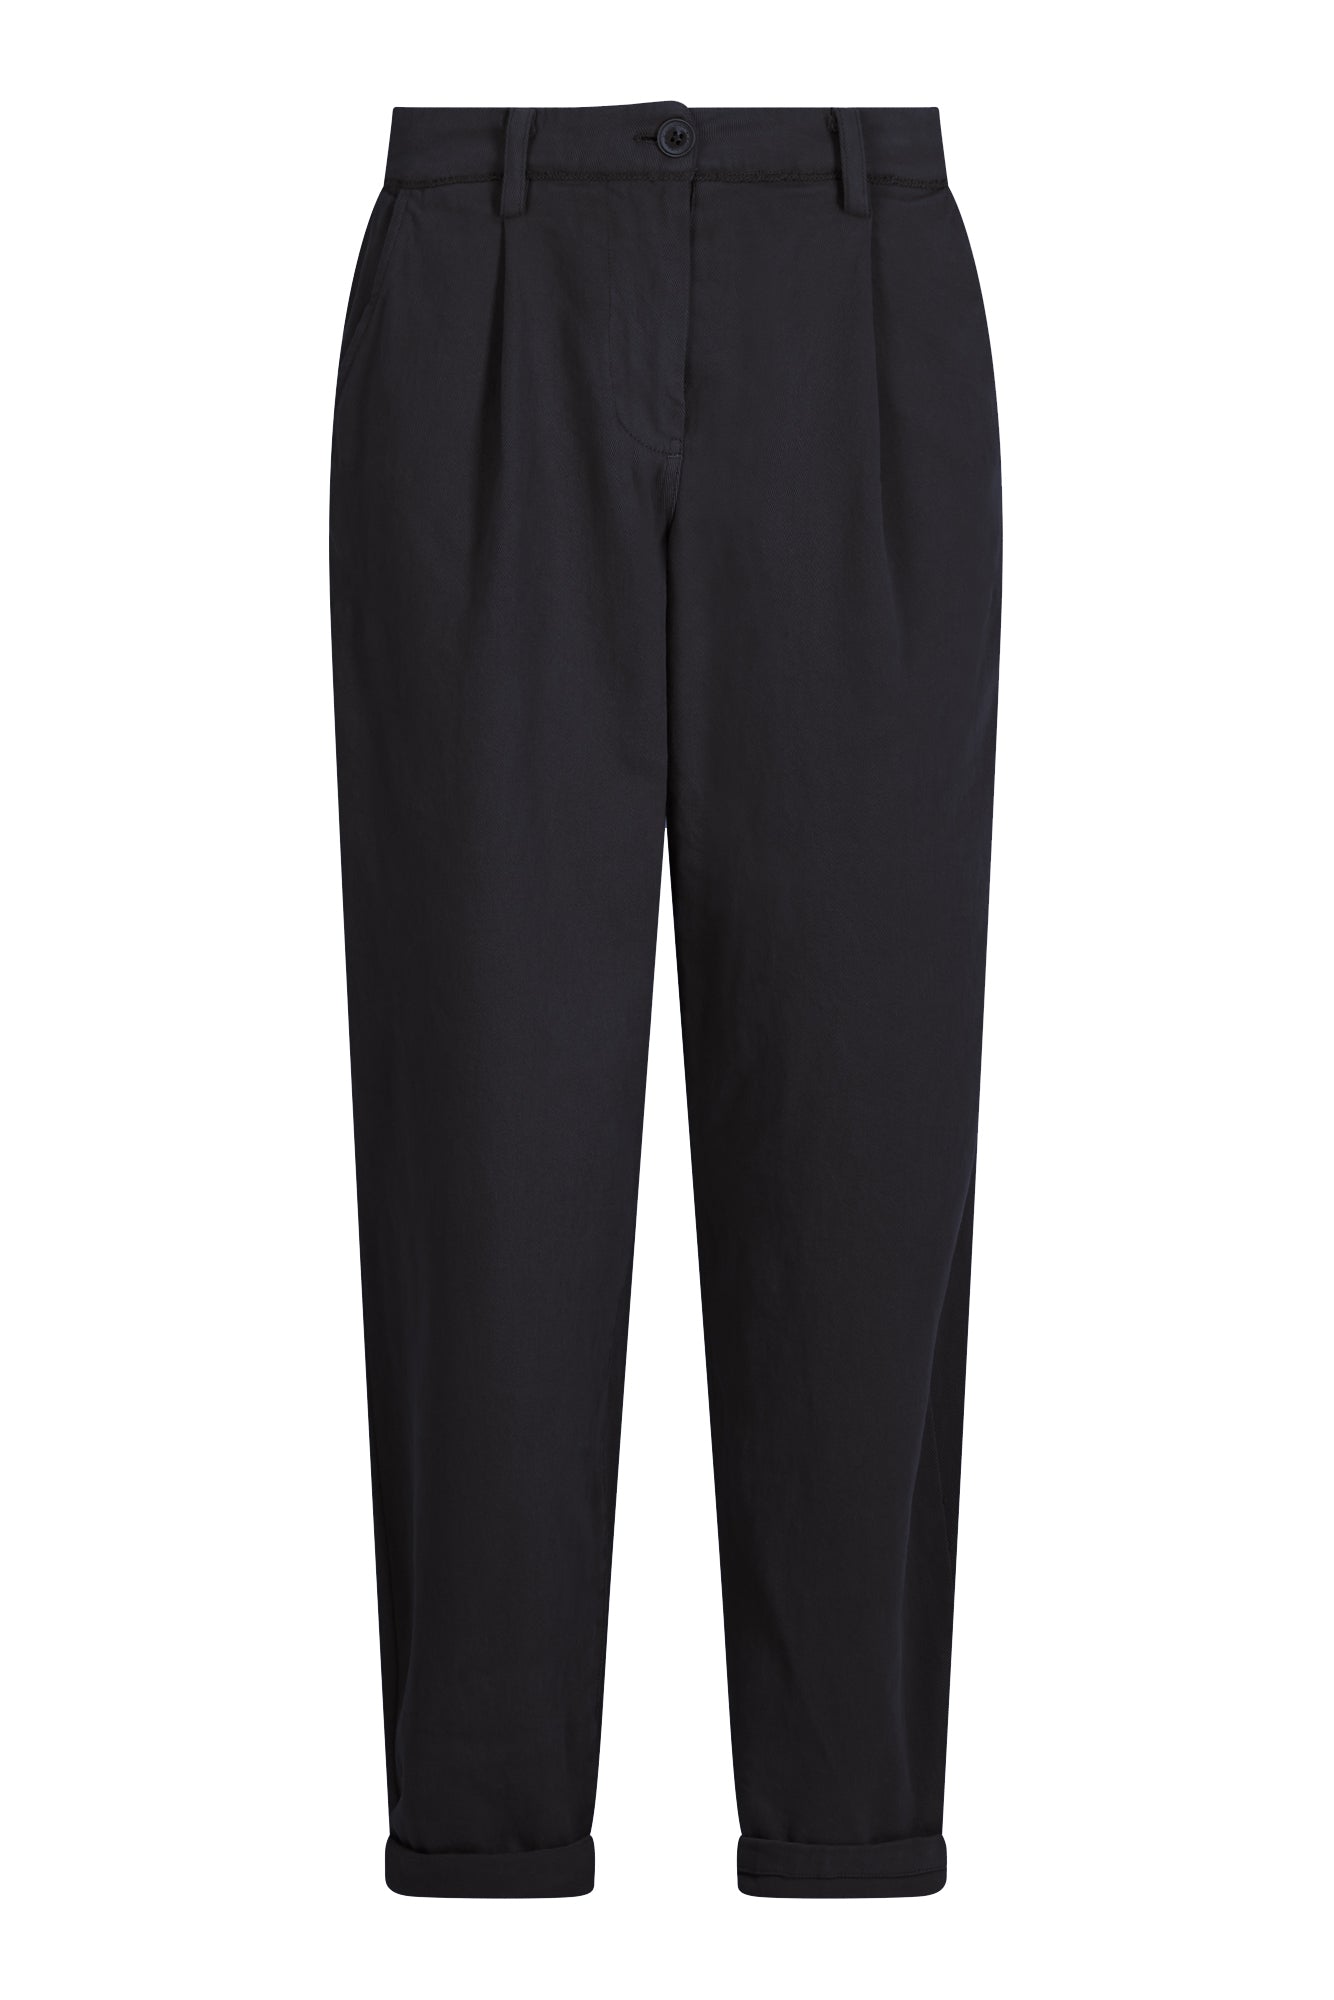 Organic Cotton Bowie Trousers in Coal Black from Komodo